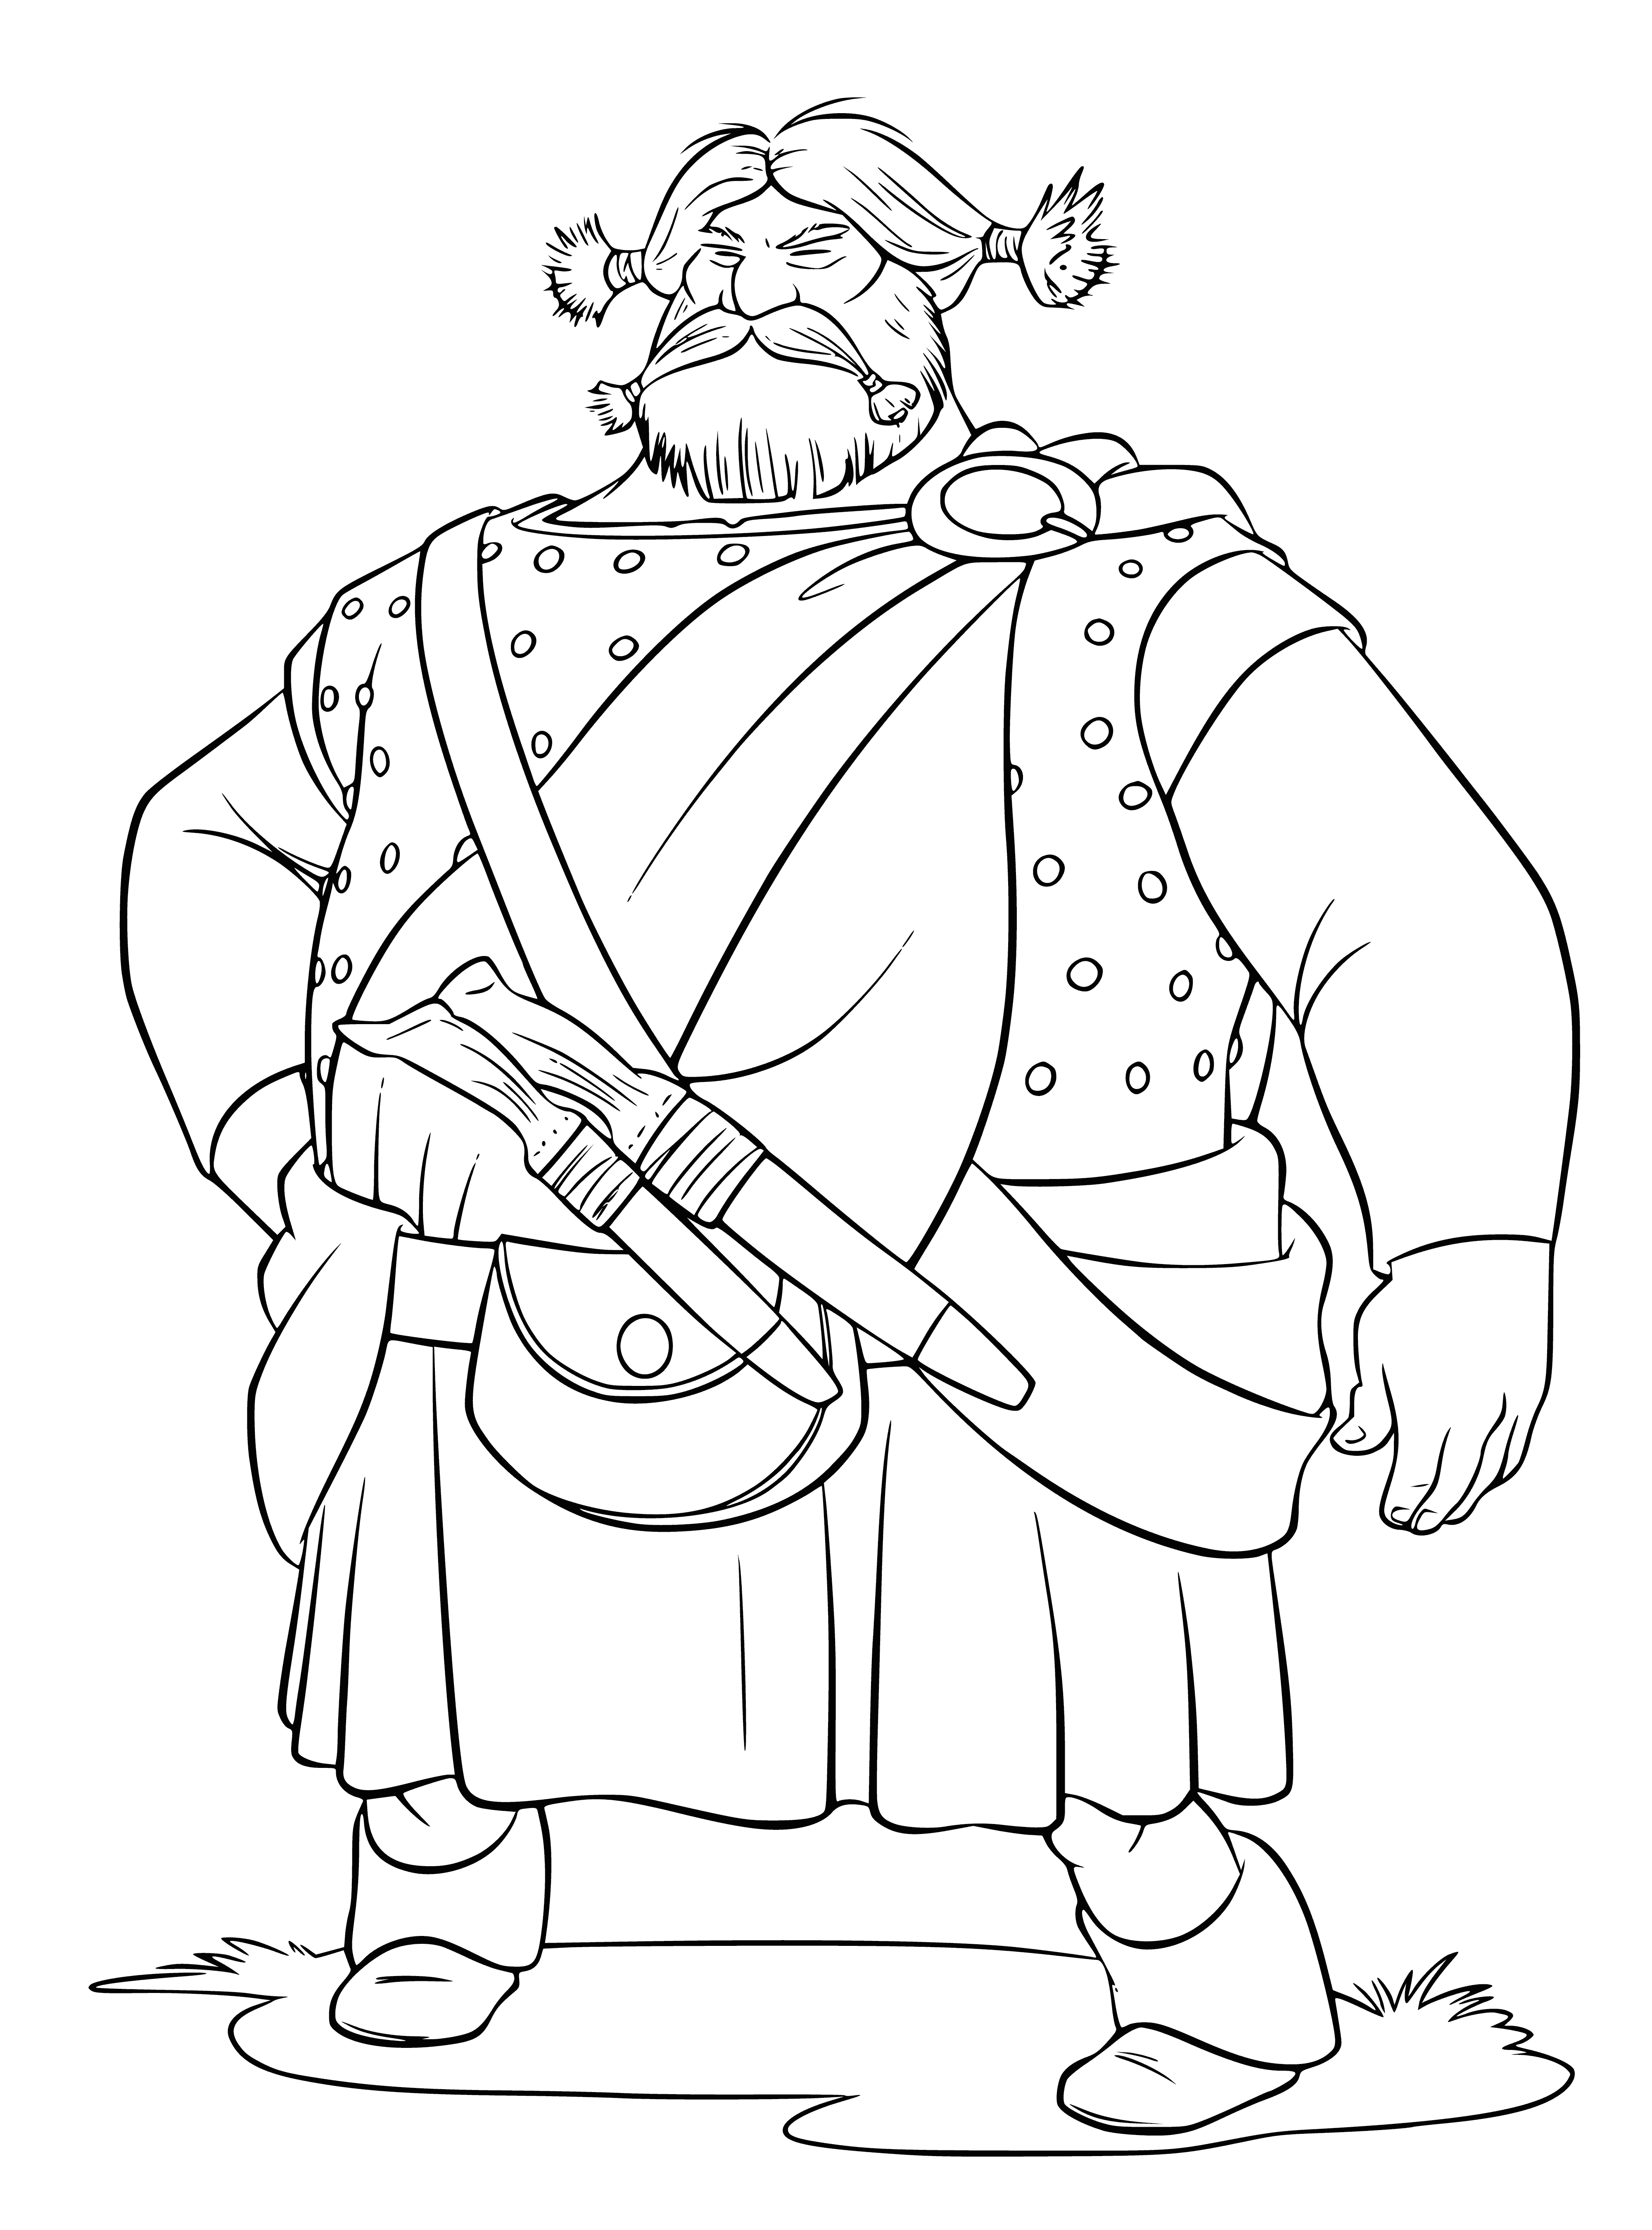 coloring page: Man in blue tunic & child in field near forest, he has sword & sheath. Boy has dark hair, man has green eyes & red hair.